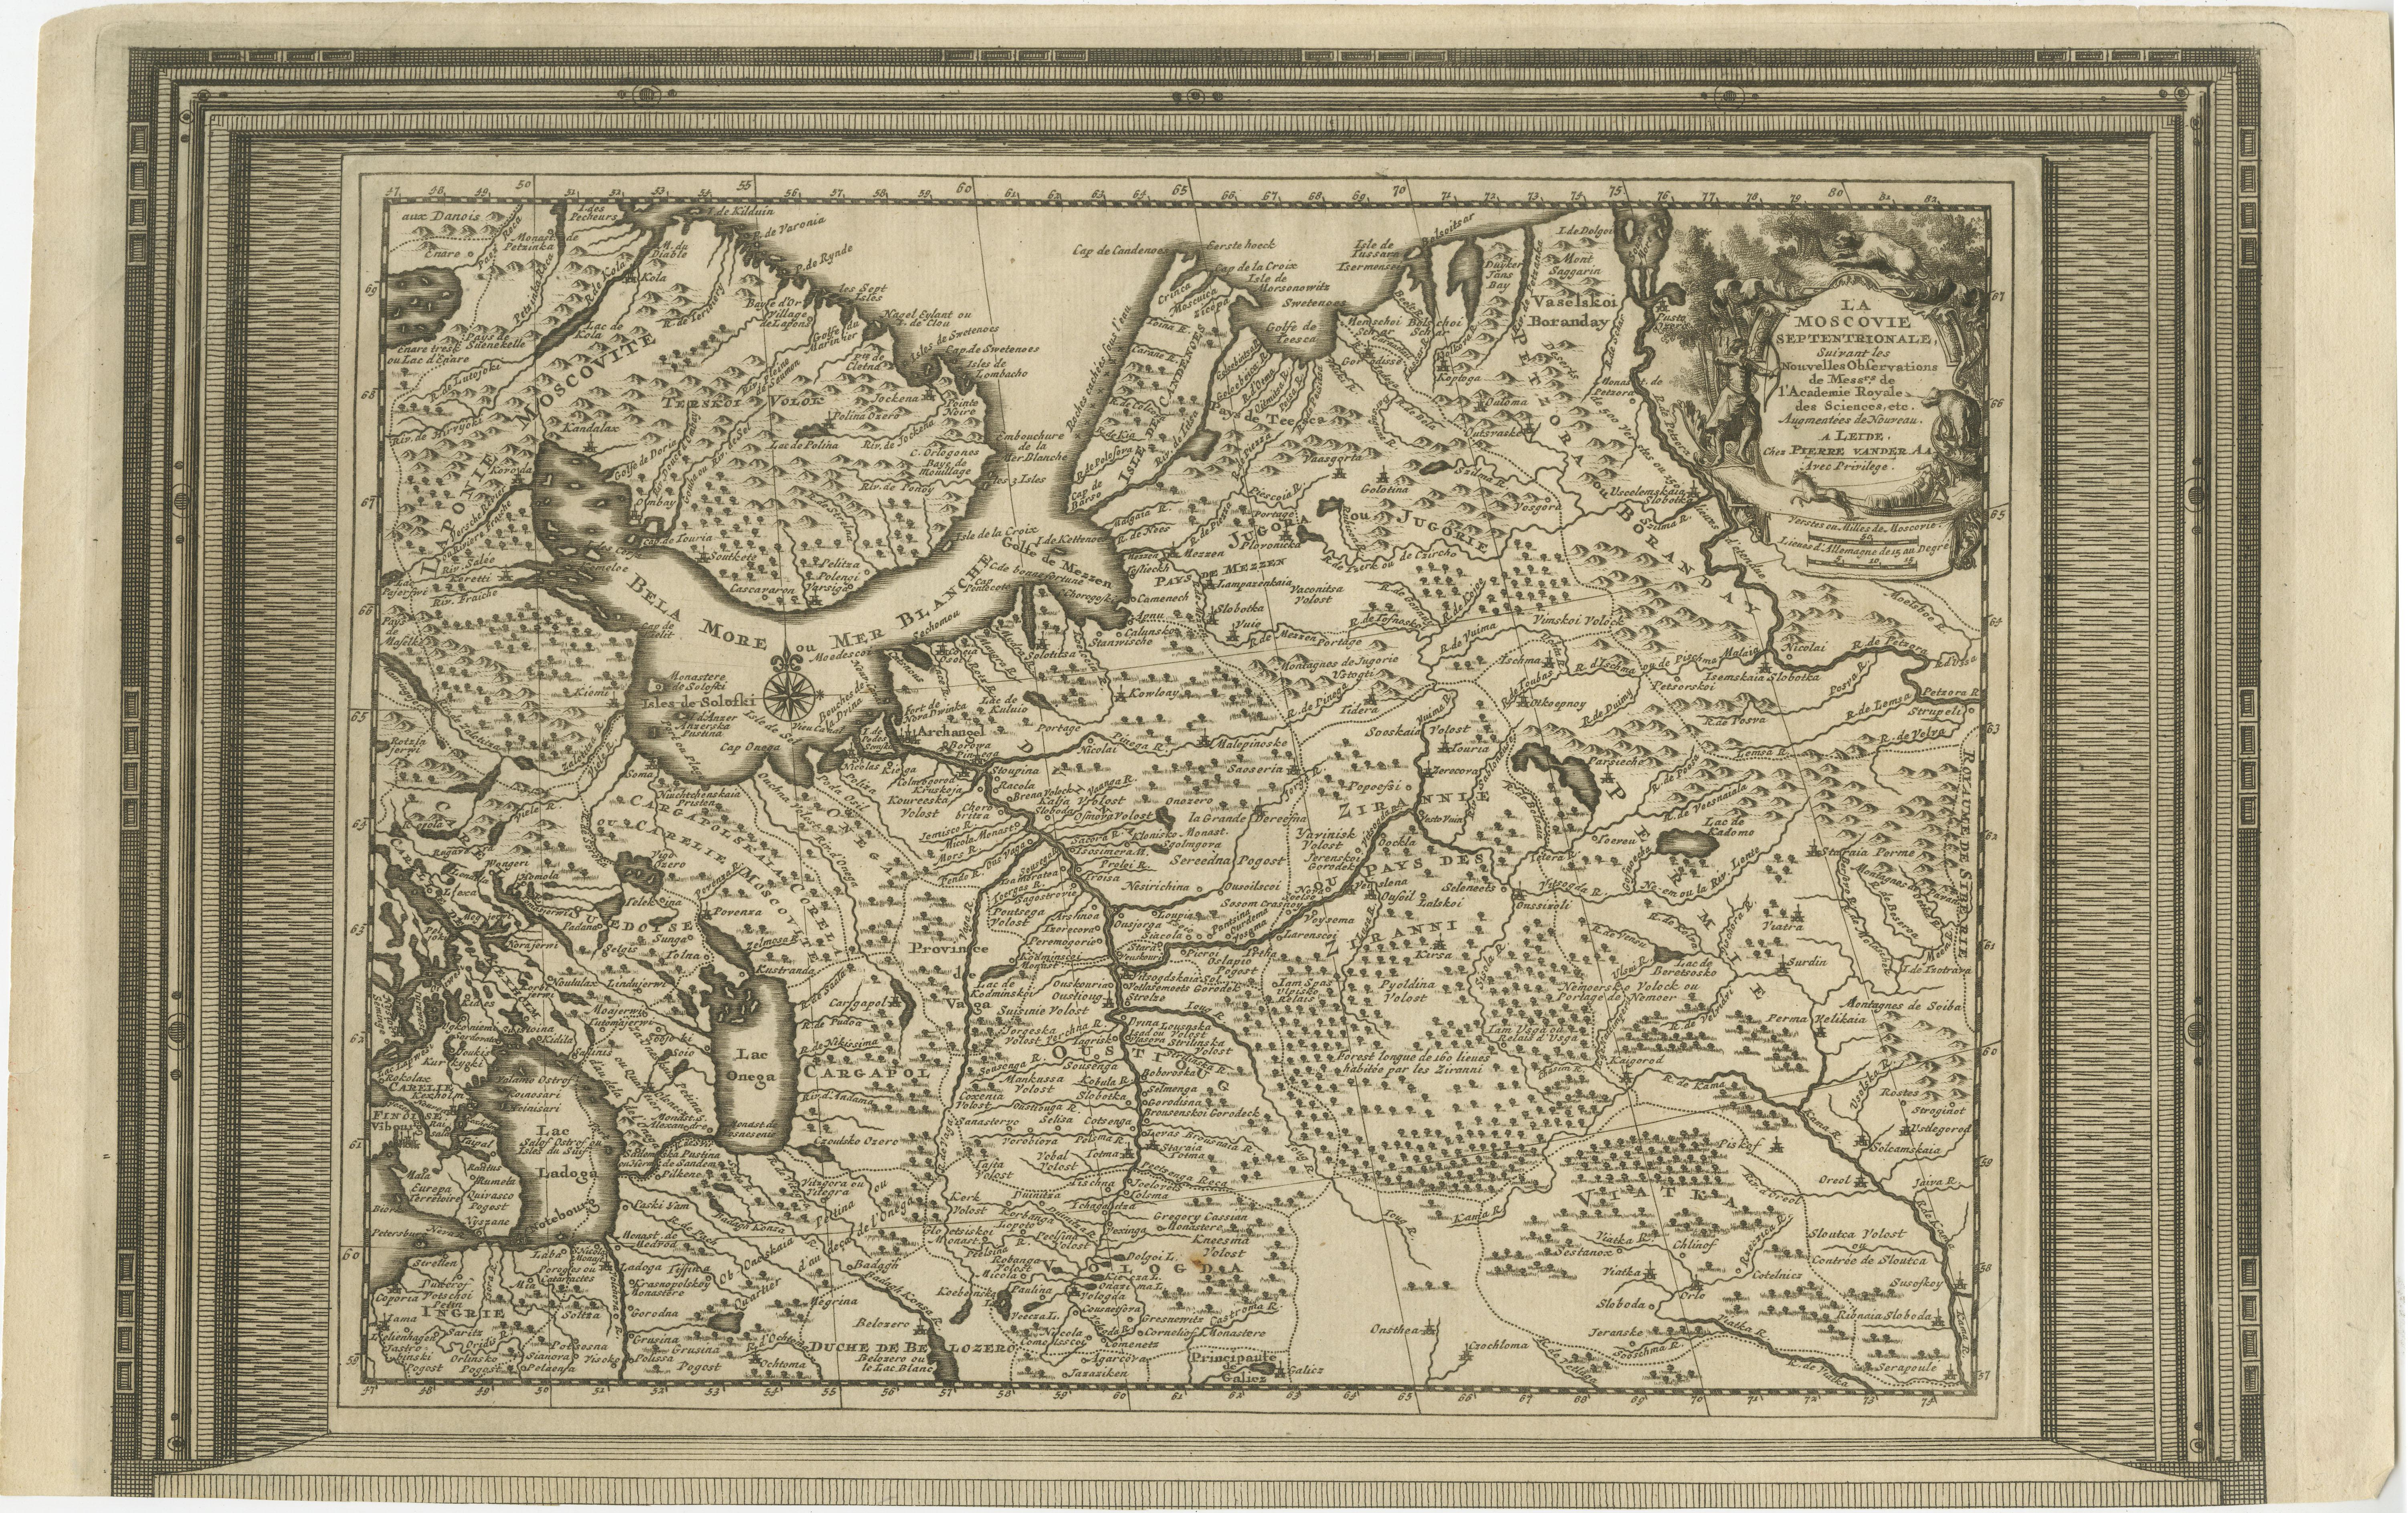 Antique map titled 'La Moscovie Septentrionale (..)'. Decorative example of van der Aa's map of the northern part of European Russia. With the picture frame border, which appeared in van der Aa's 'Nouvelle Theatre Du Monde', published in 1713.